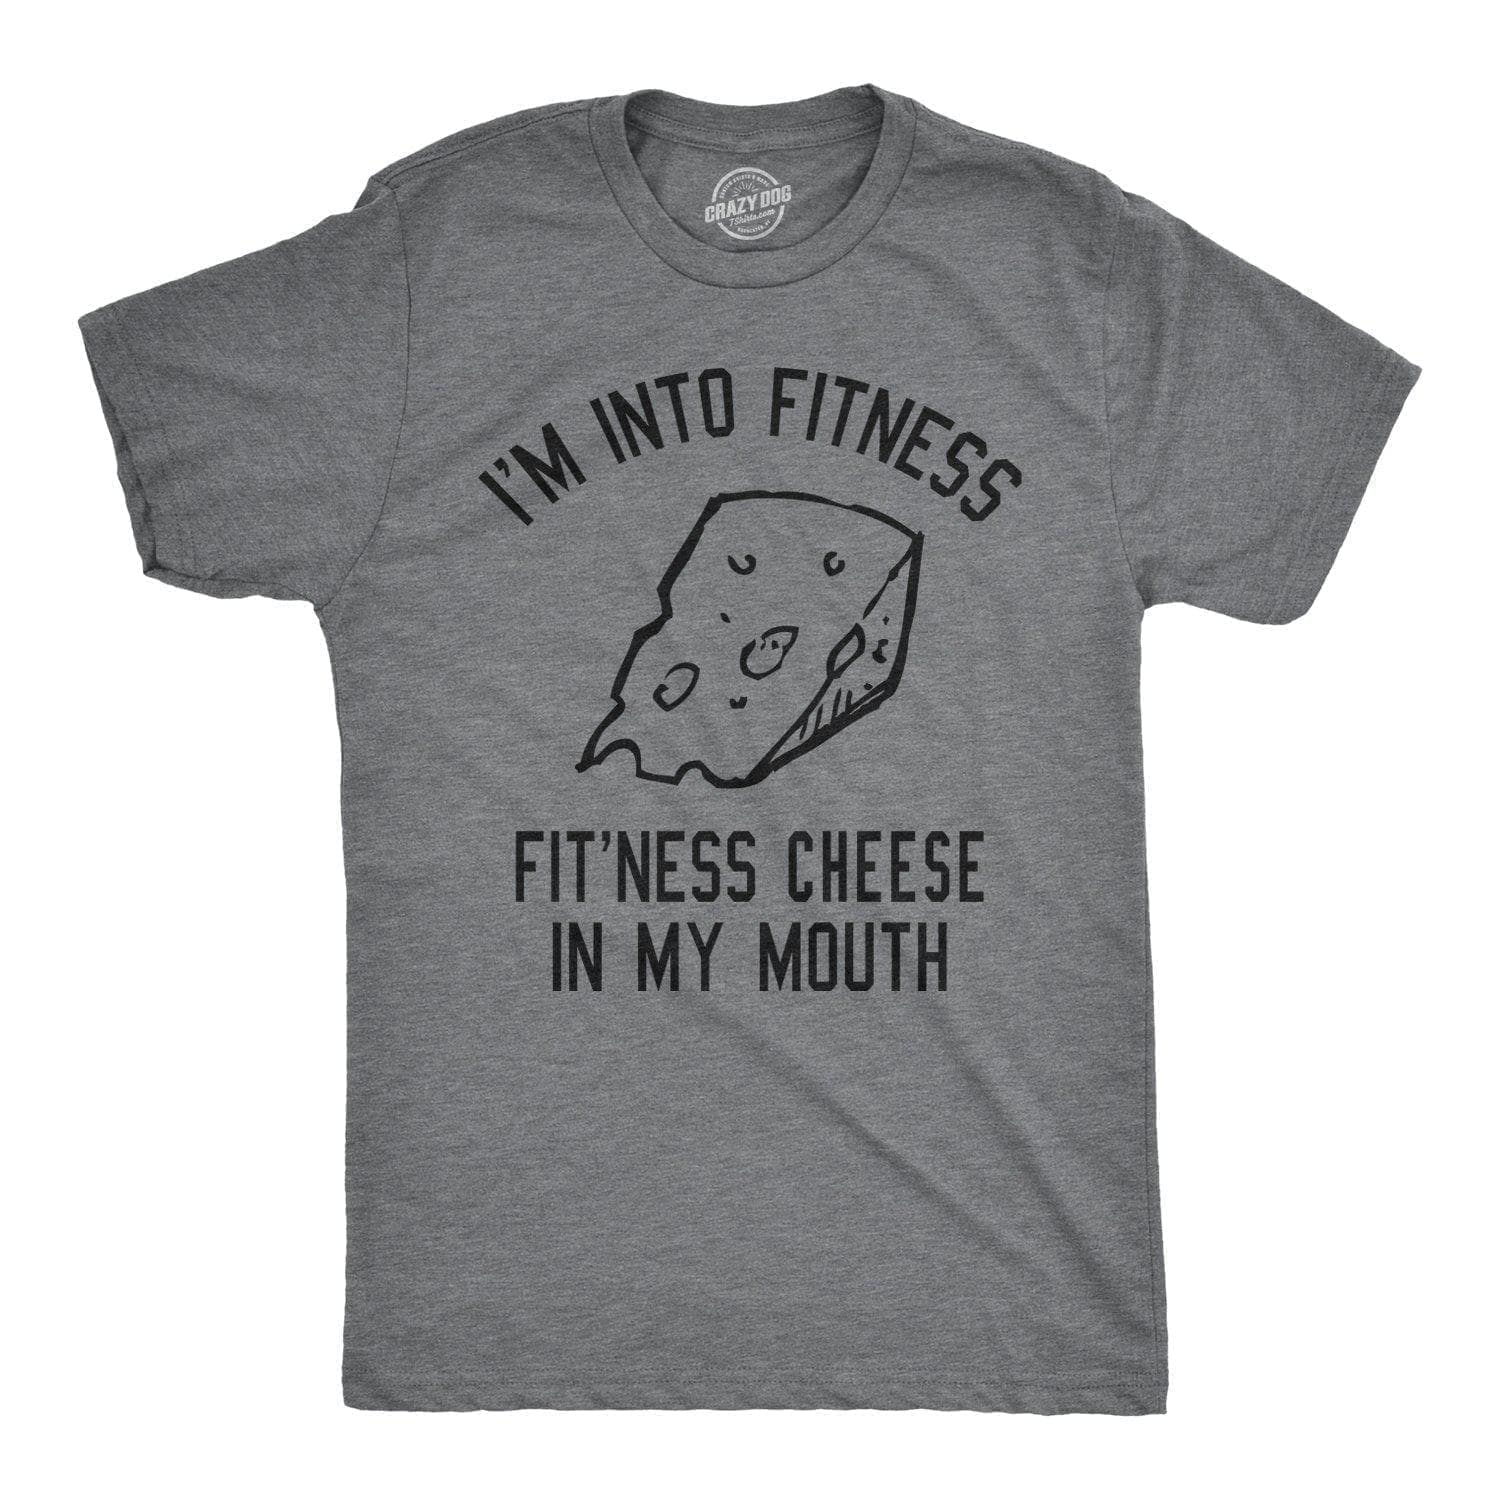 Fitness Cheese In My Mouth Men's Tshirt  -  Crazy Dog T-Shirts